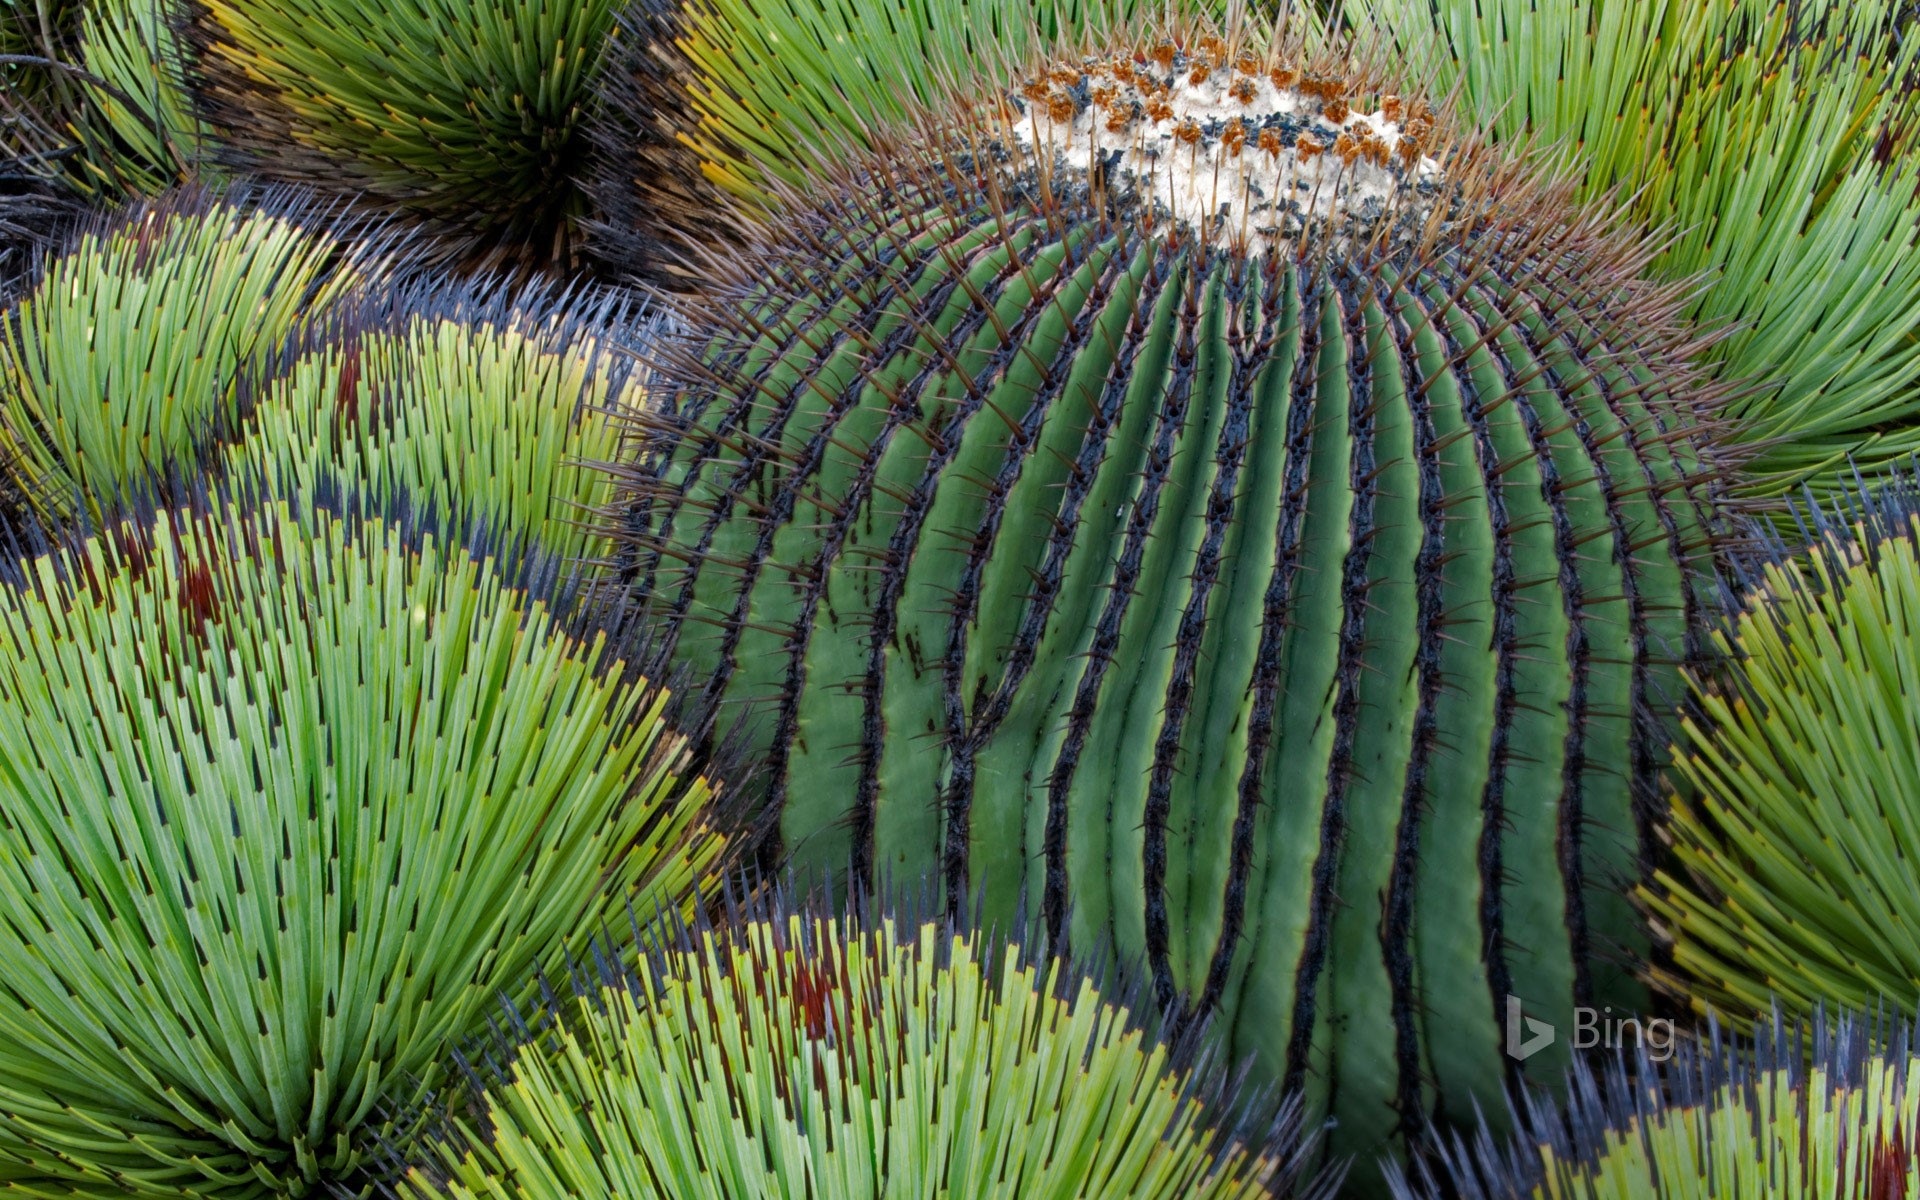 A giant barrel cactus and yucca plants in the Chihuahuan Desert, Mexico